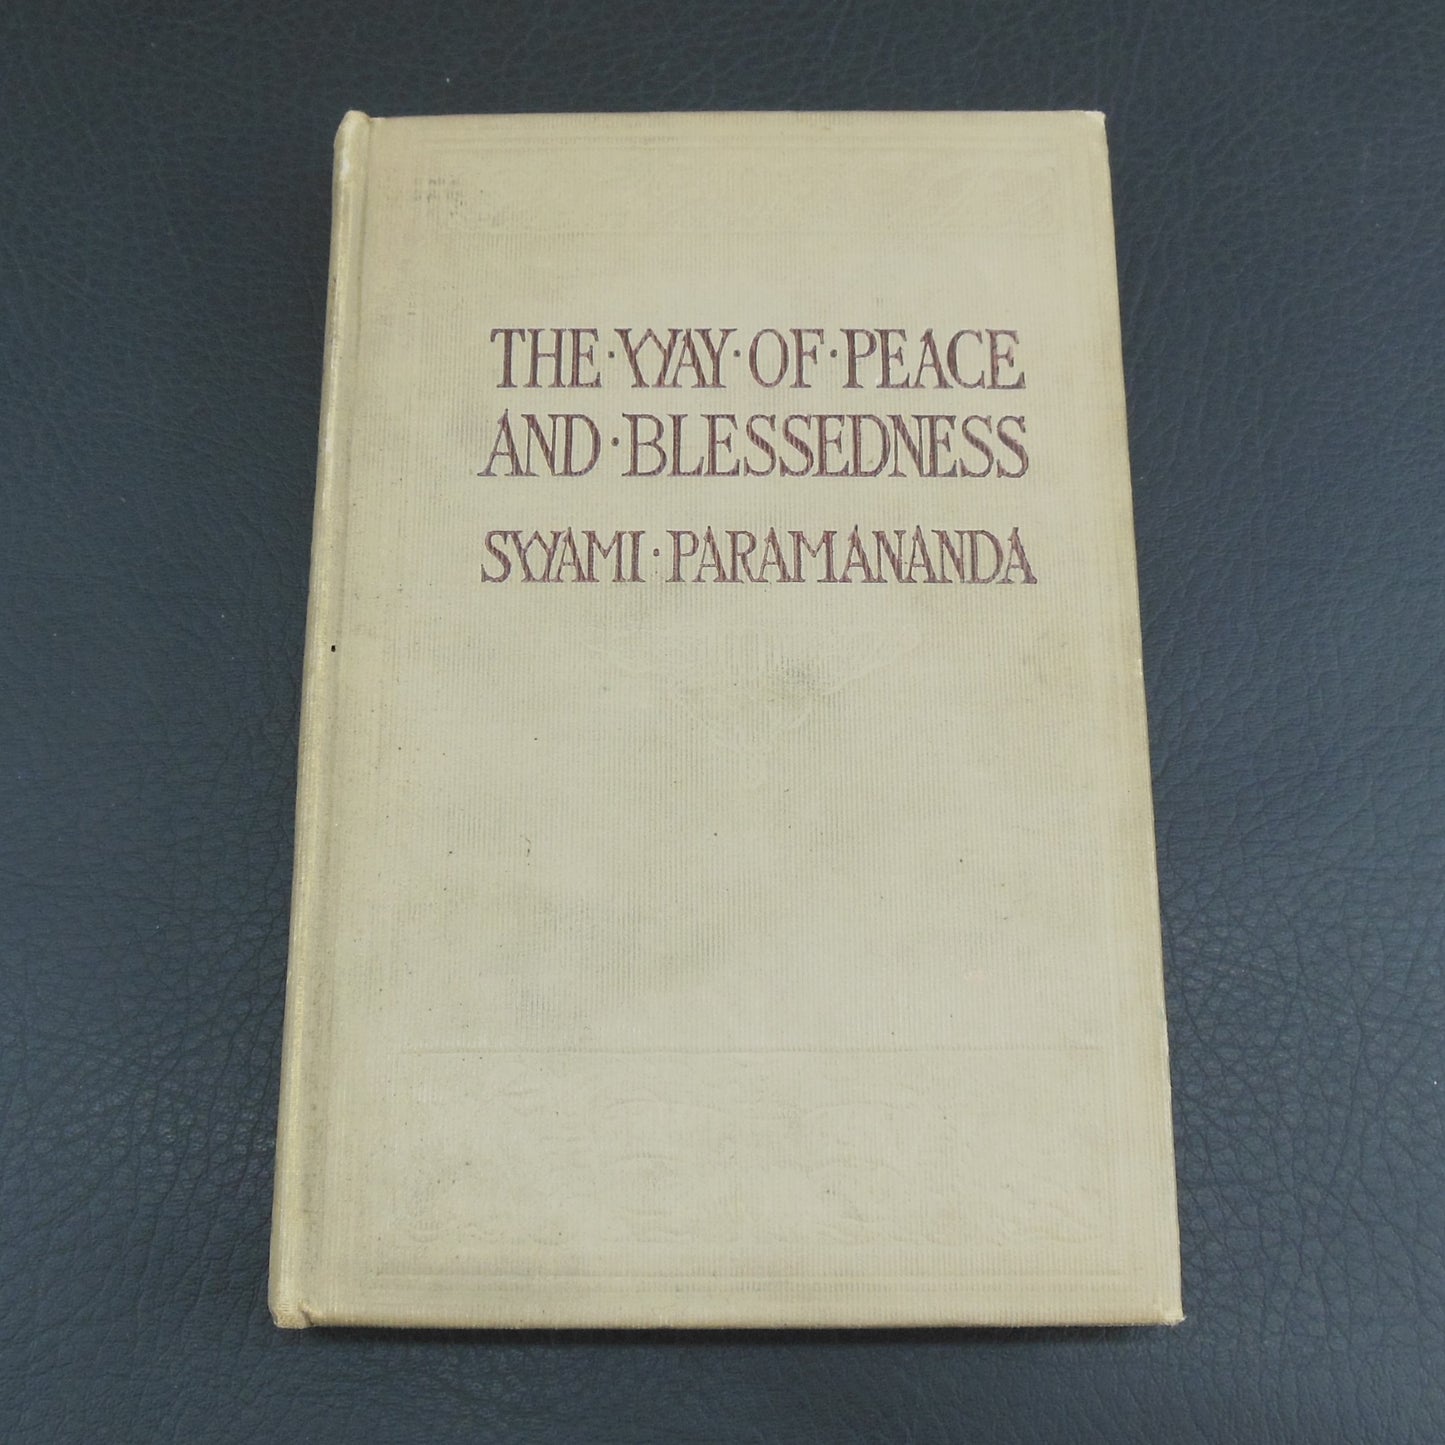 Swami Paramananda Signed Book - The Way Of Peace And Blessedness 1913